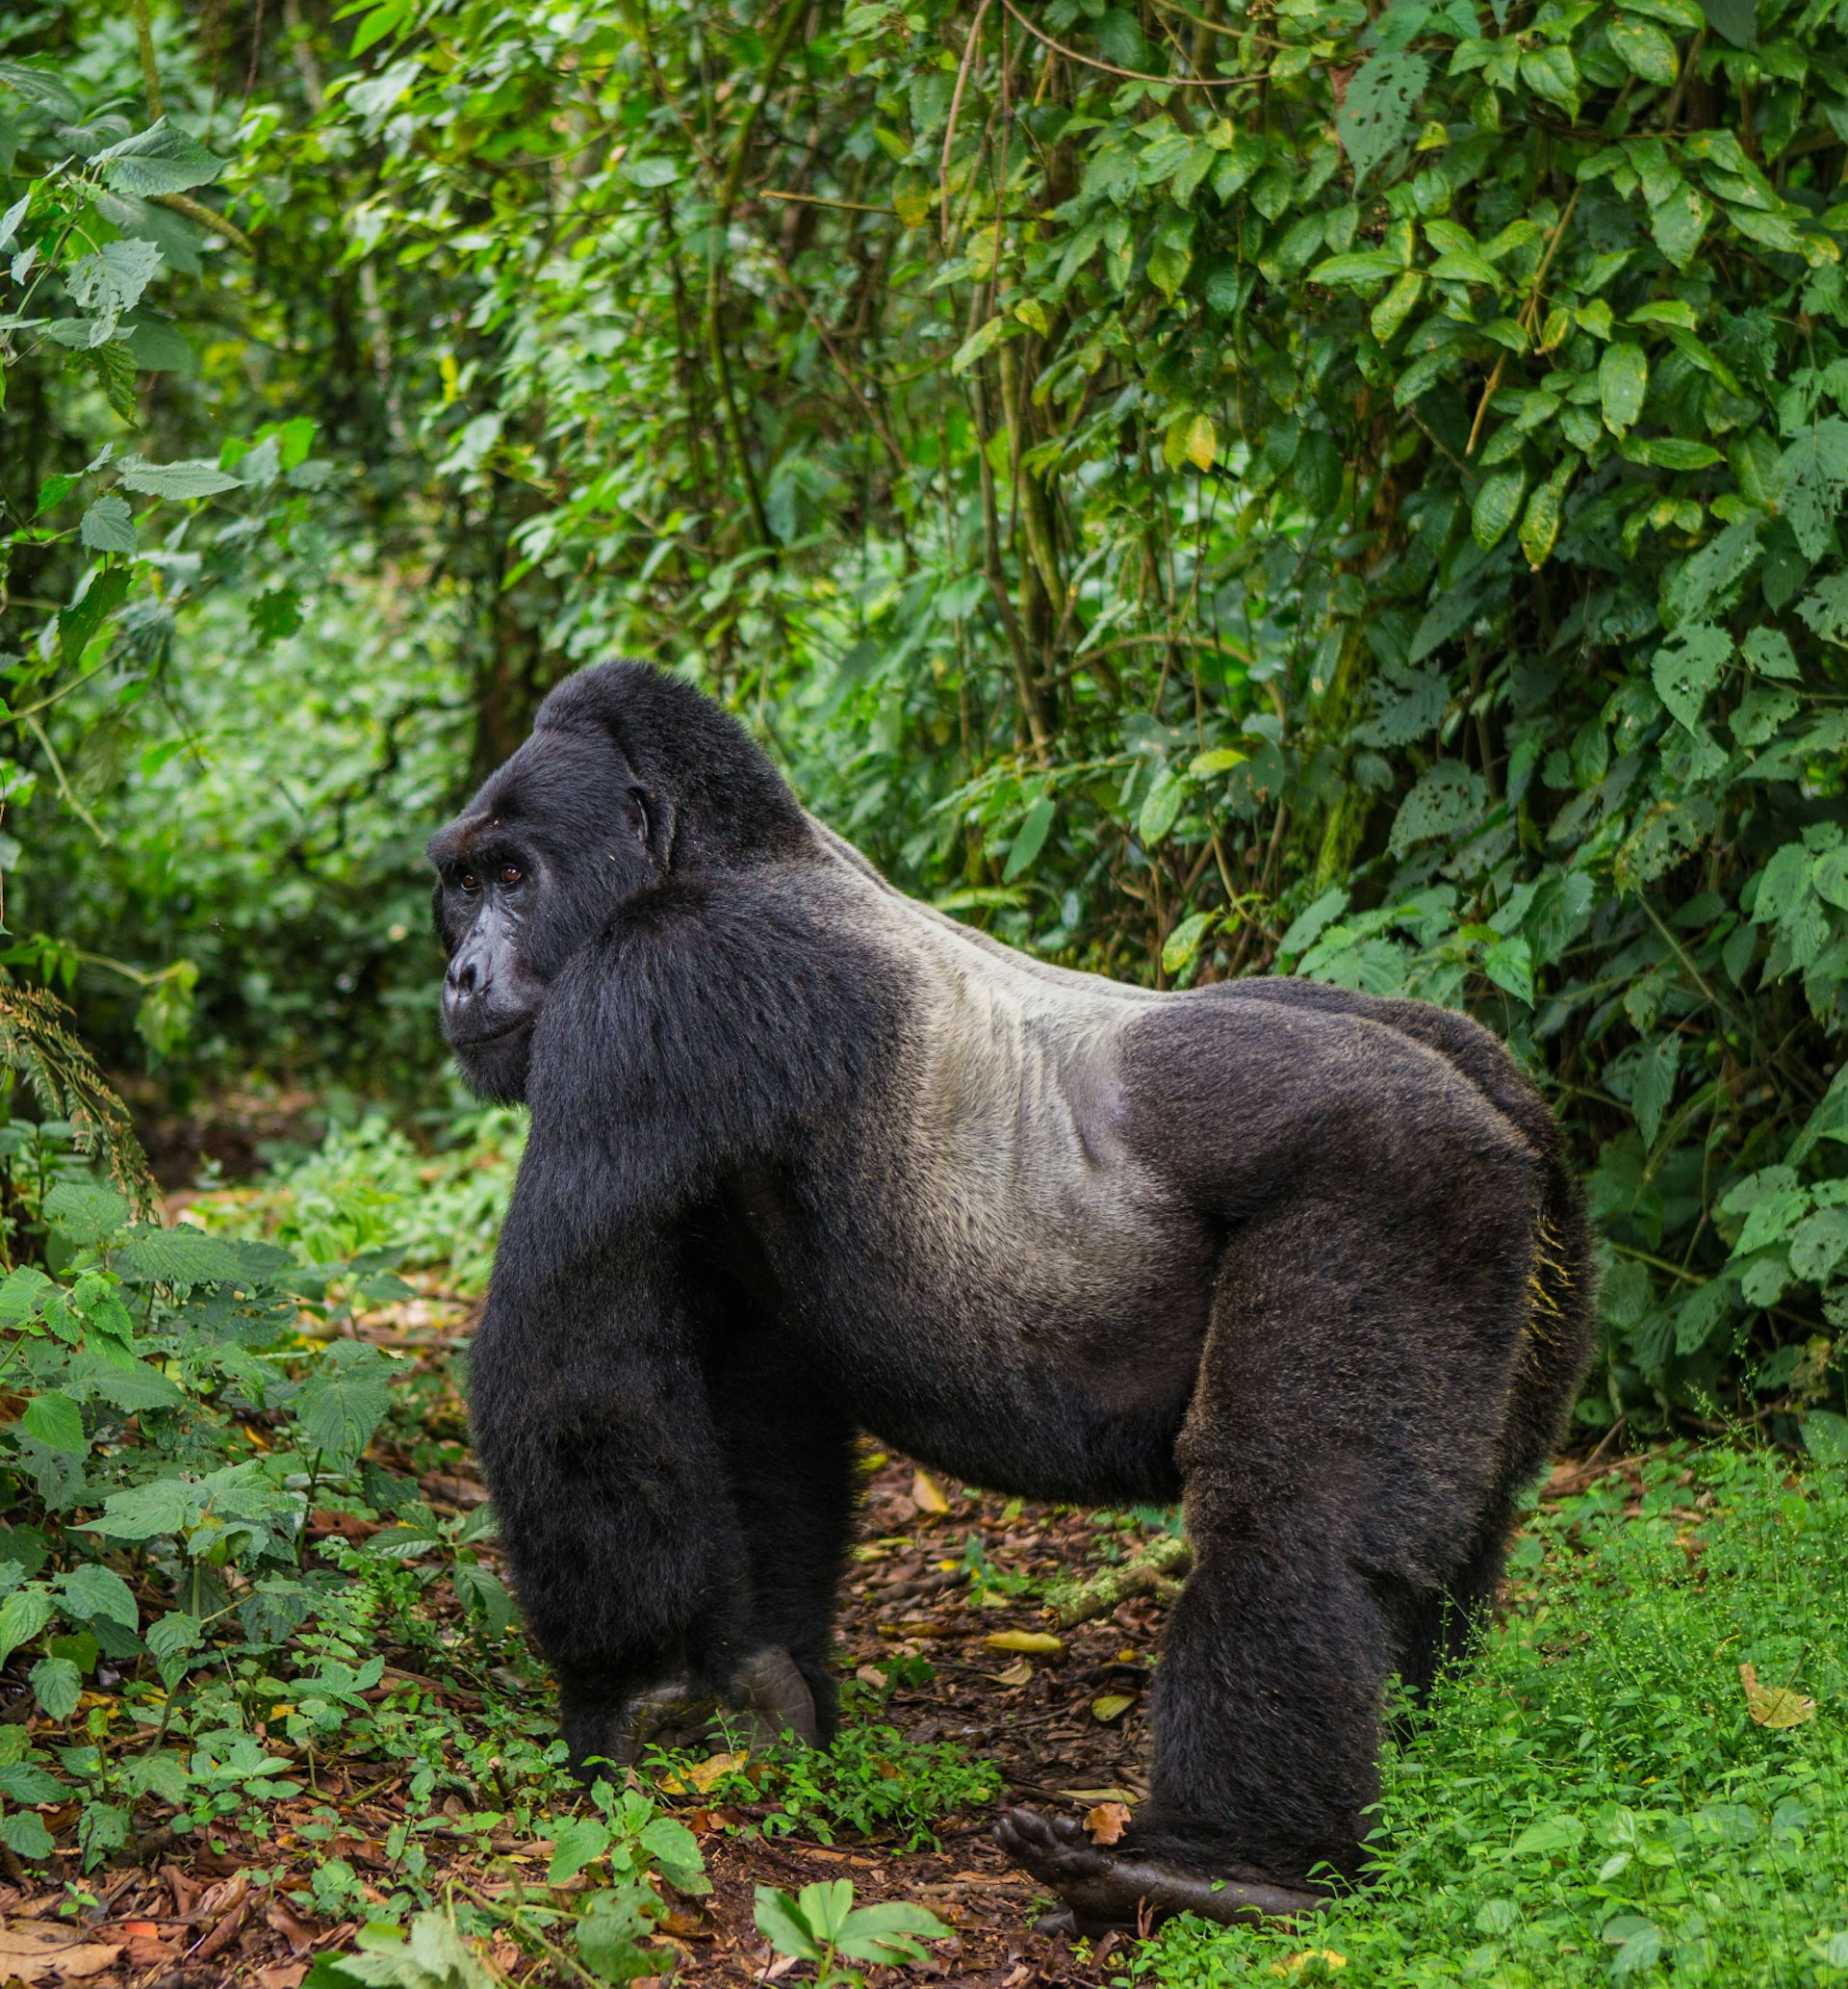 A dominant male gorilla standing on all fours in the forest of Bwindi. His silver back striped between his jet black legs, shoulders, arms and head. ©GUDKOV ANDREY/Shutterstock 